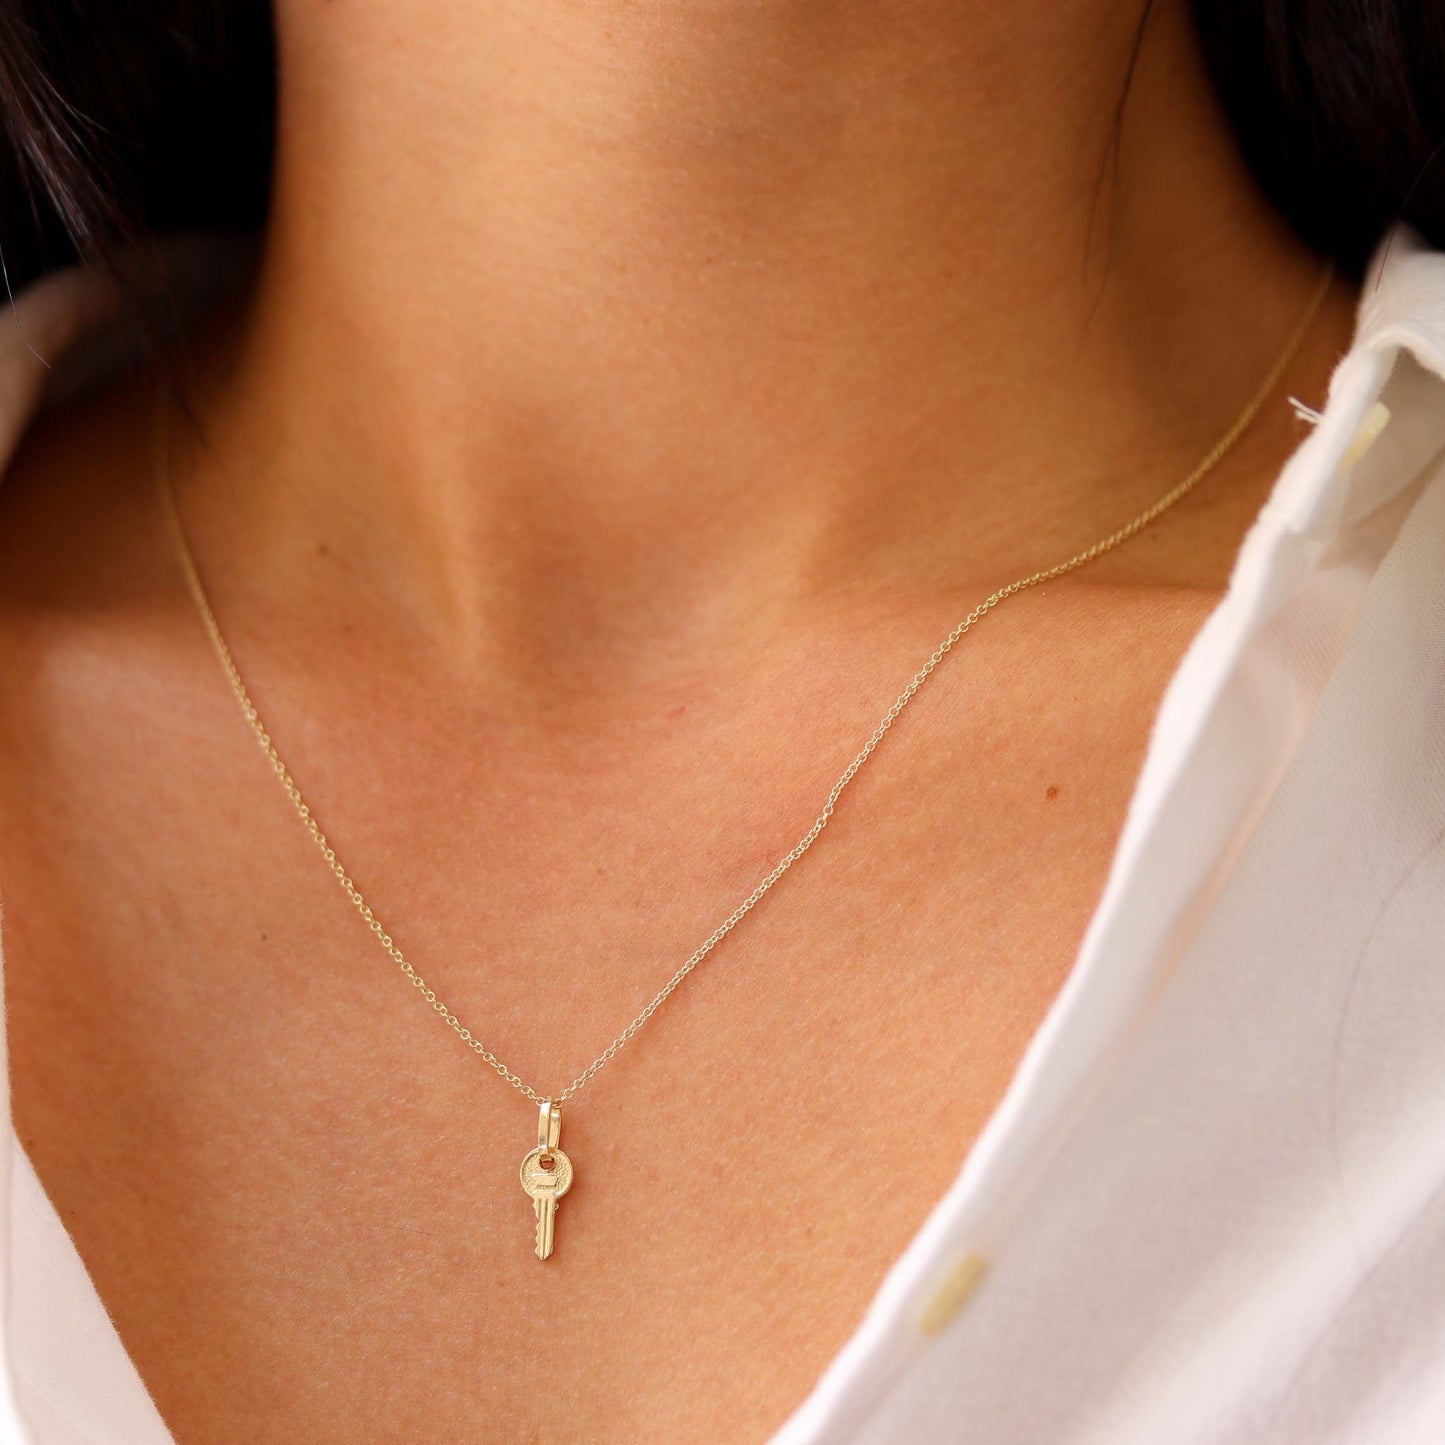 Golden Key Necklace – Design Gold Jewelry